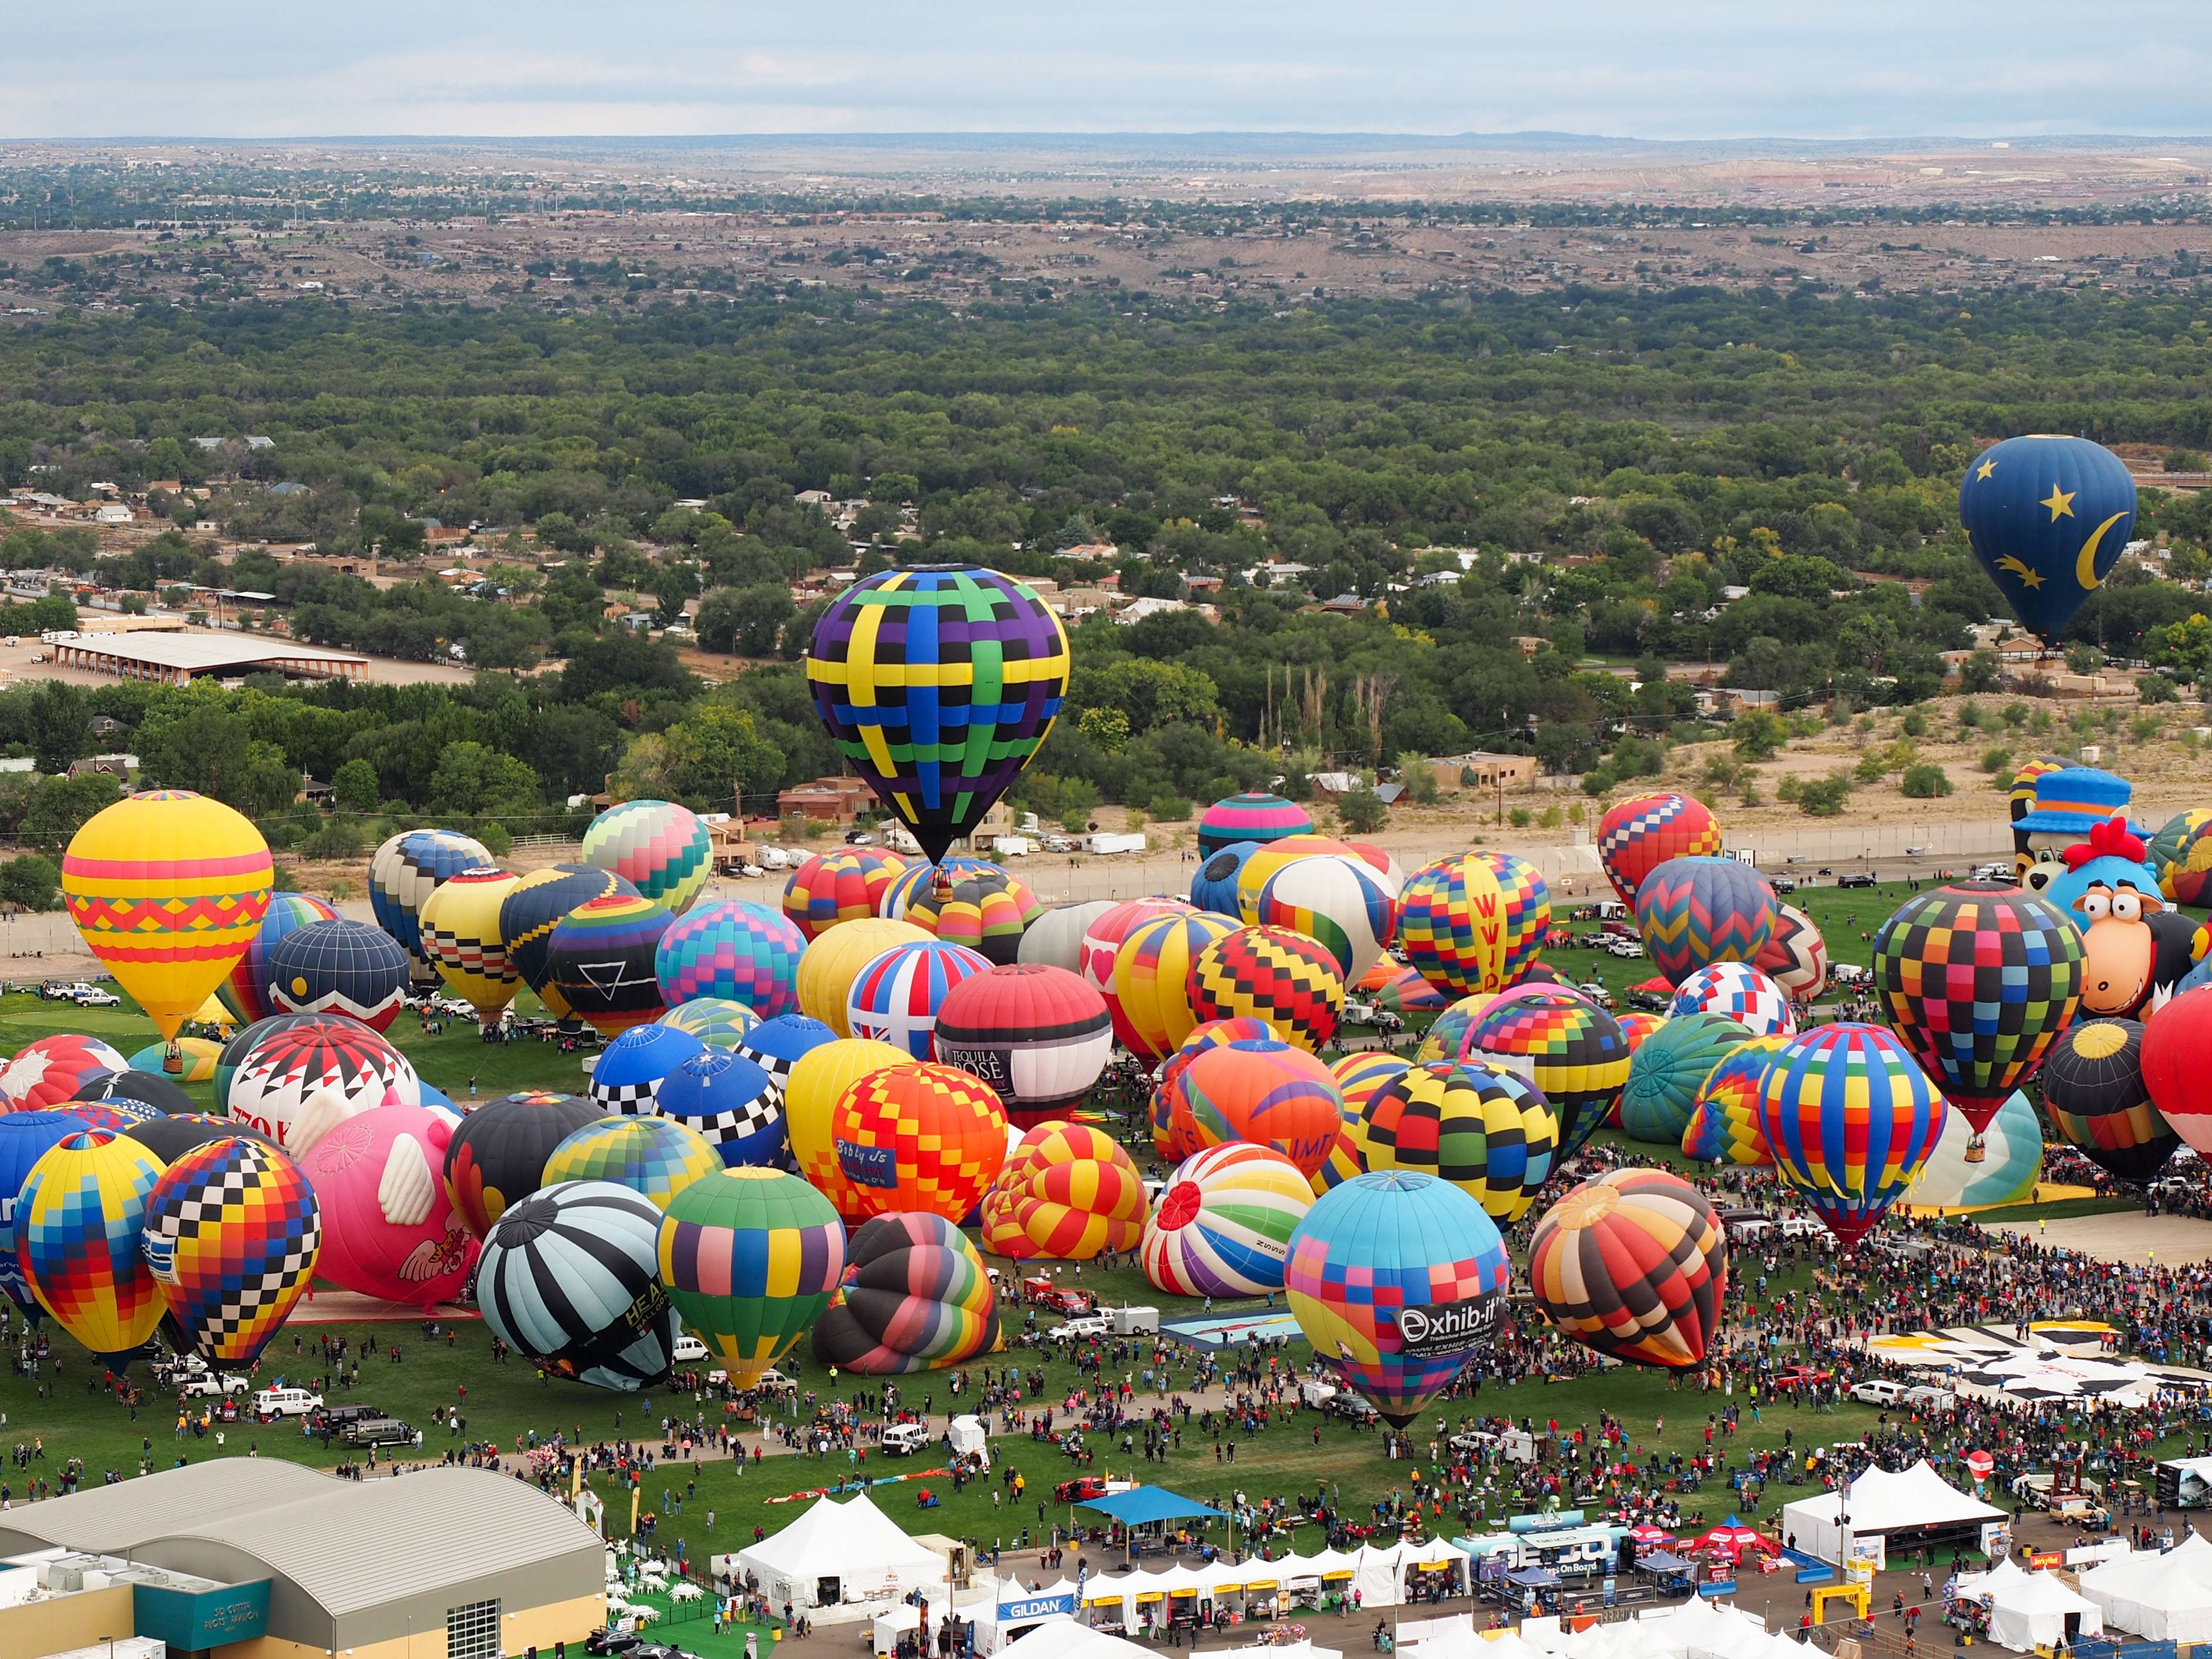 Going to the International Balloon Fiesta in Albuqerque, New Mexico